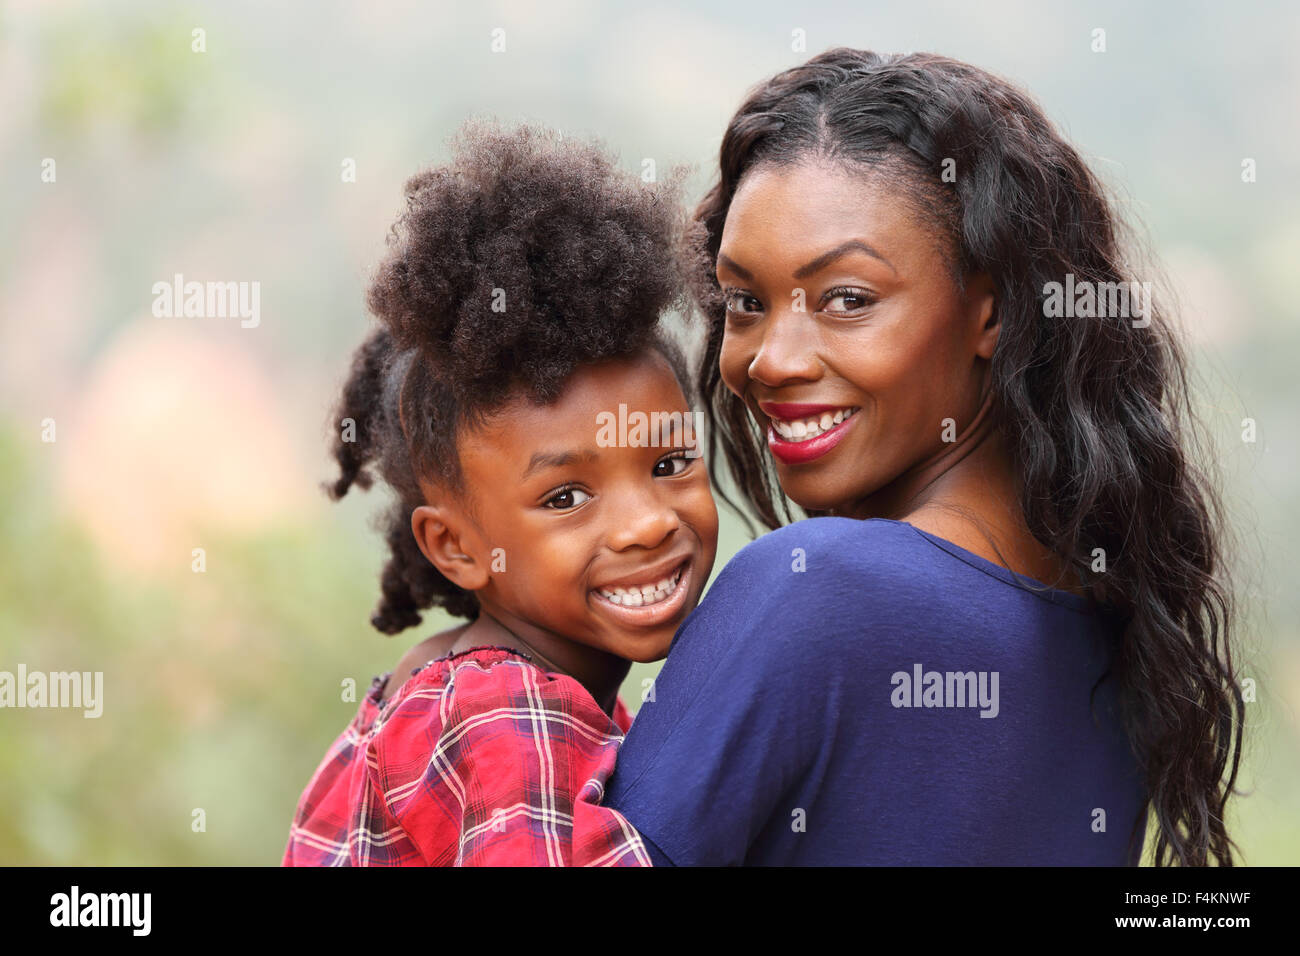 Happy Mother and Child Outdoors. Stock Photo